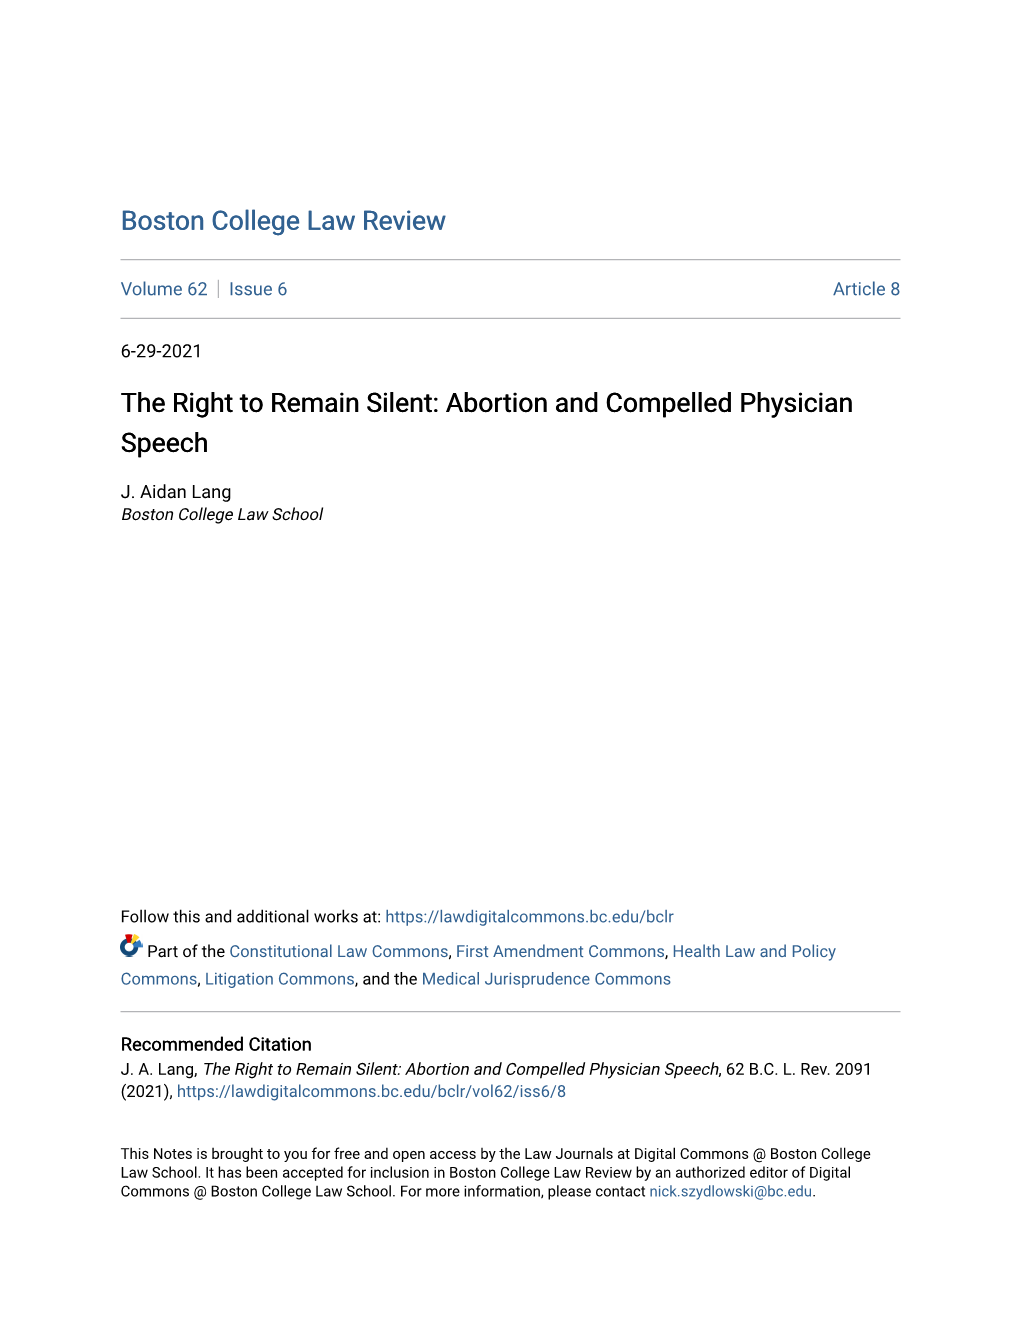 The Right to Remain Silent: Abortion and Compelled Physician Speech